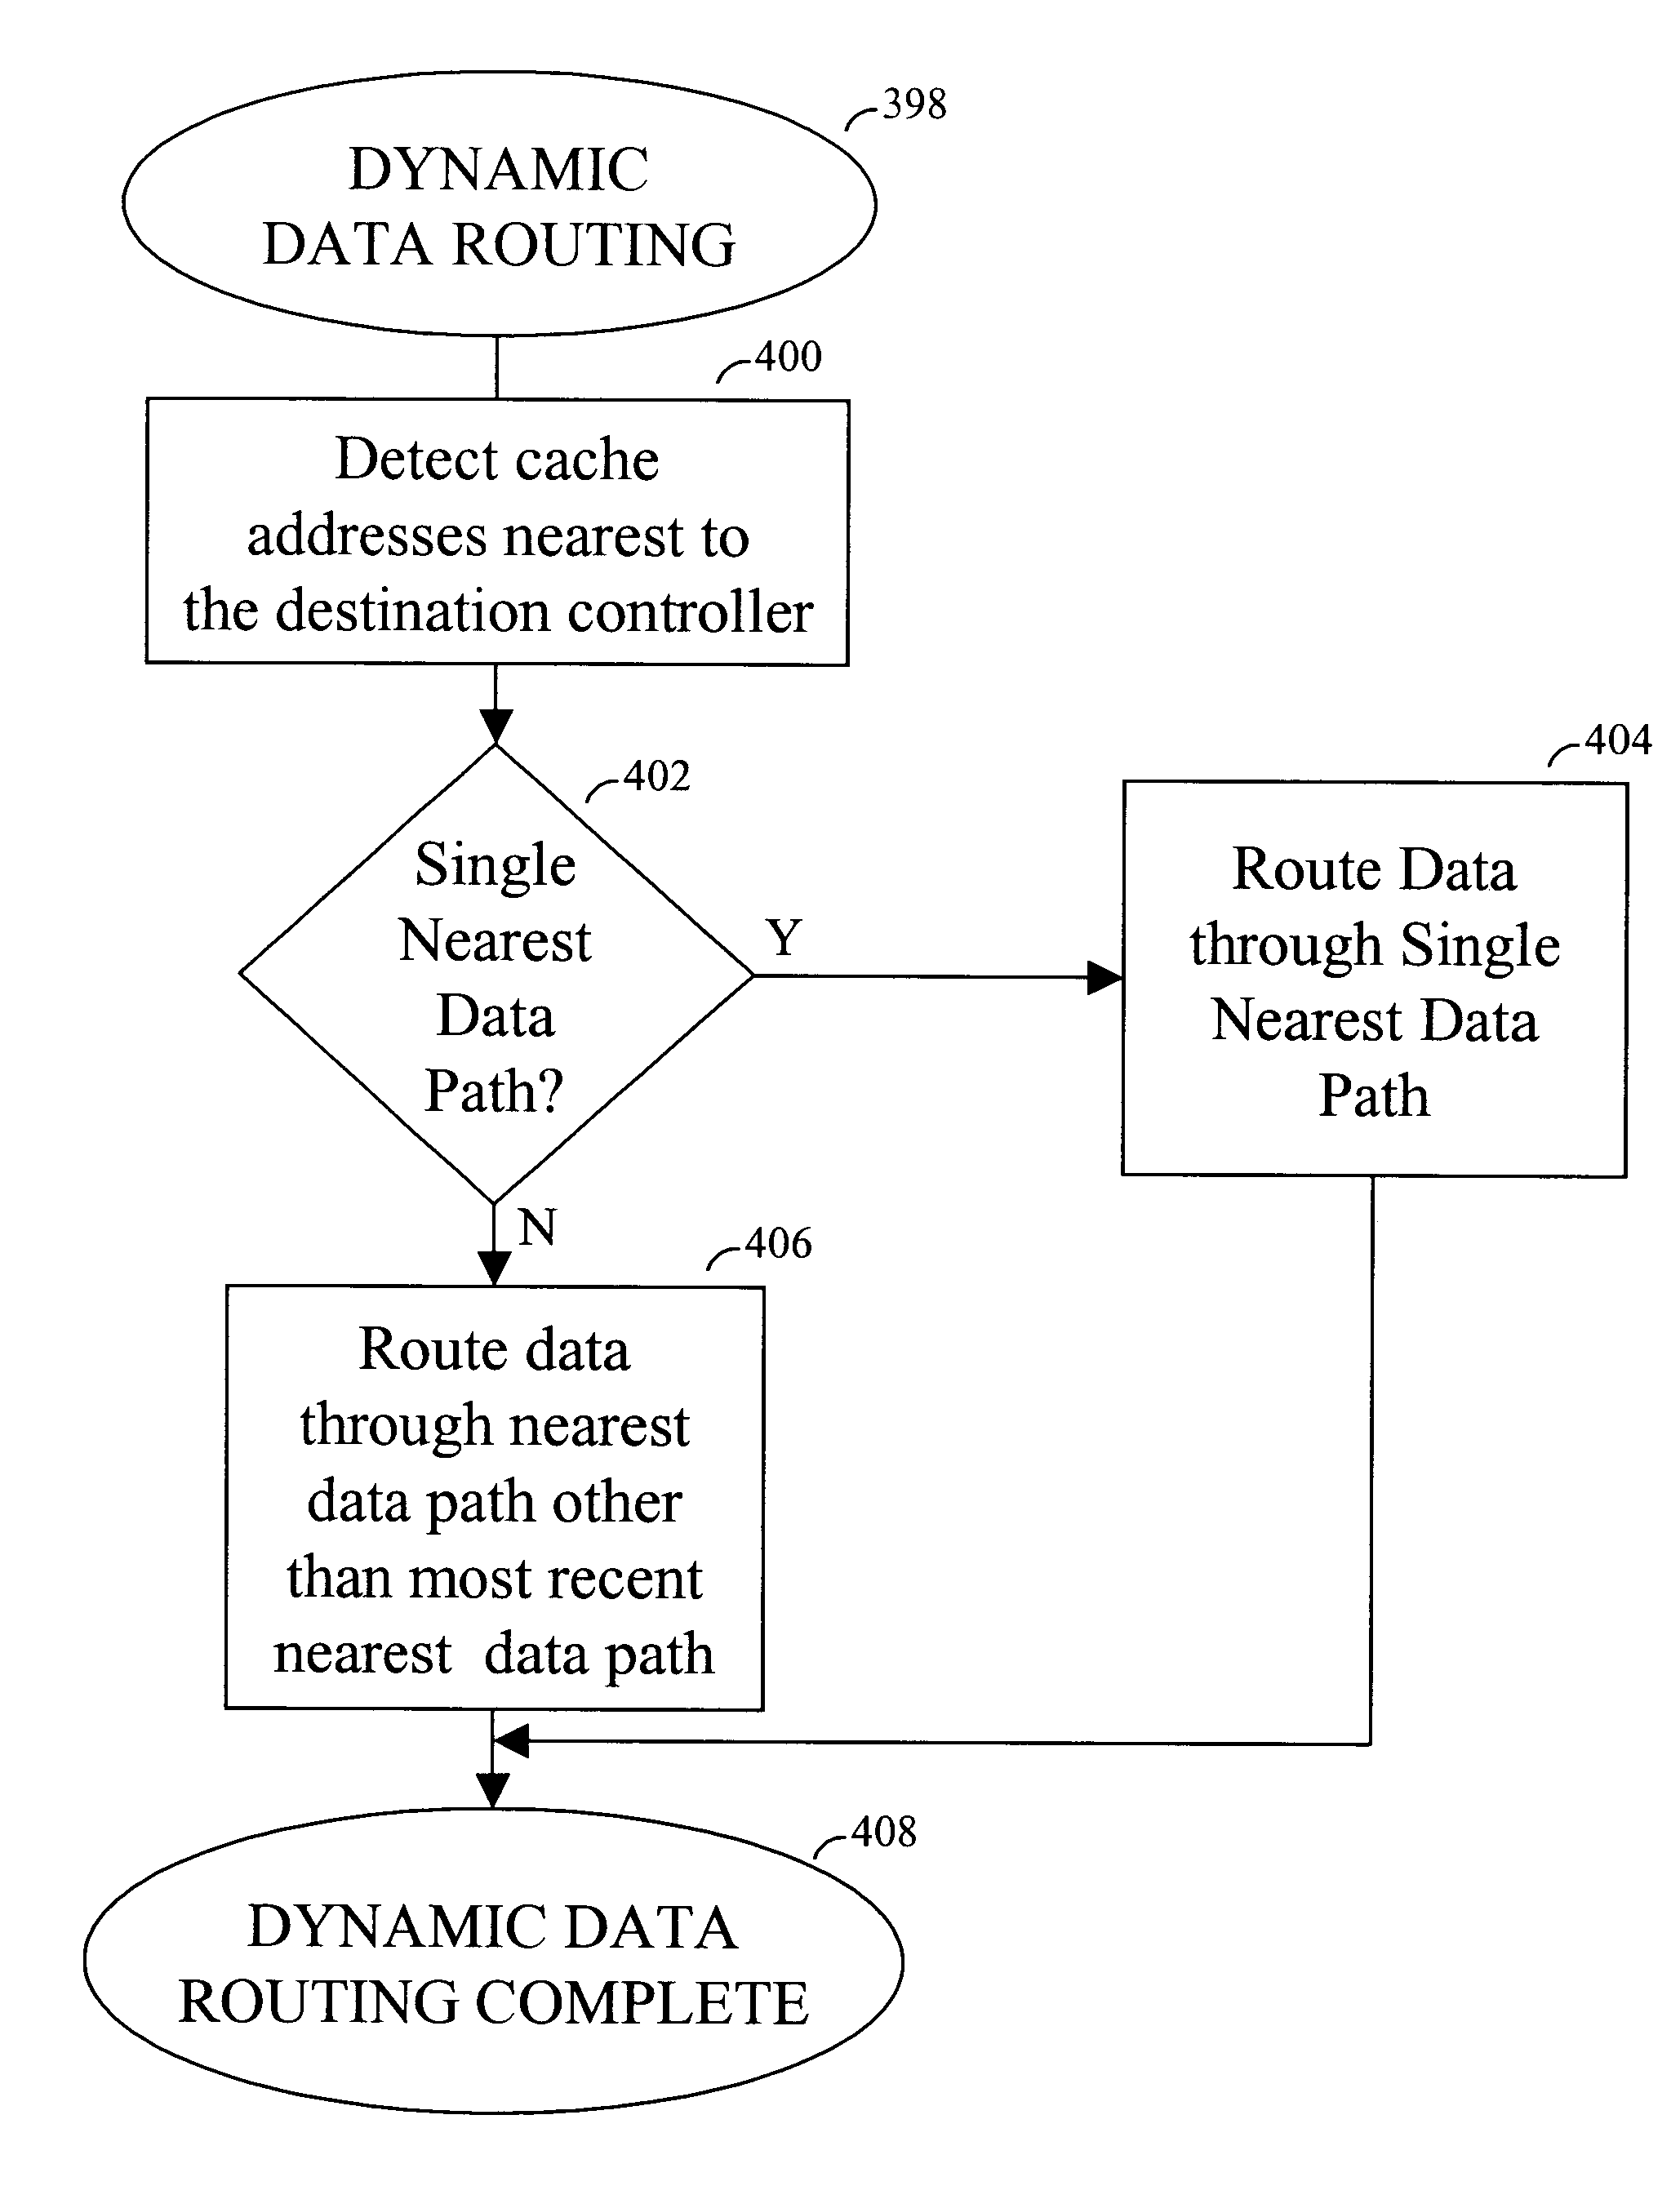 Dynamic routing of data across multiple data paths from a source controller to a destination controller